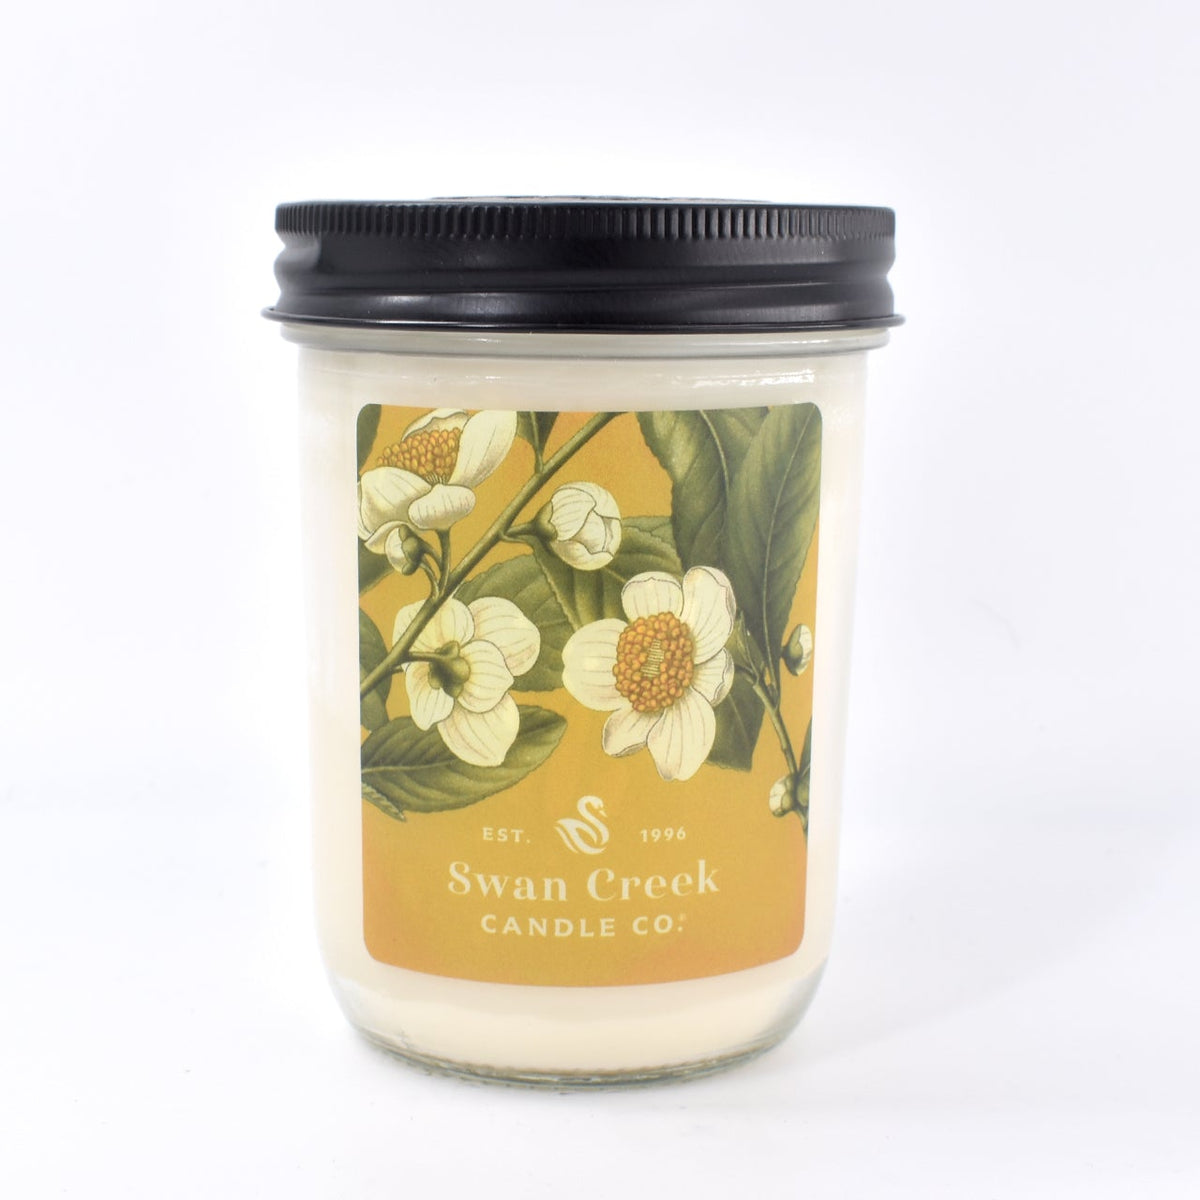 Honey Soaked Apples 12oz Fruit & Florals Jar by Swan Creek Candle